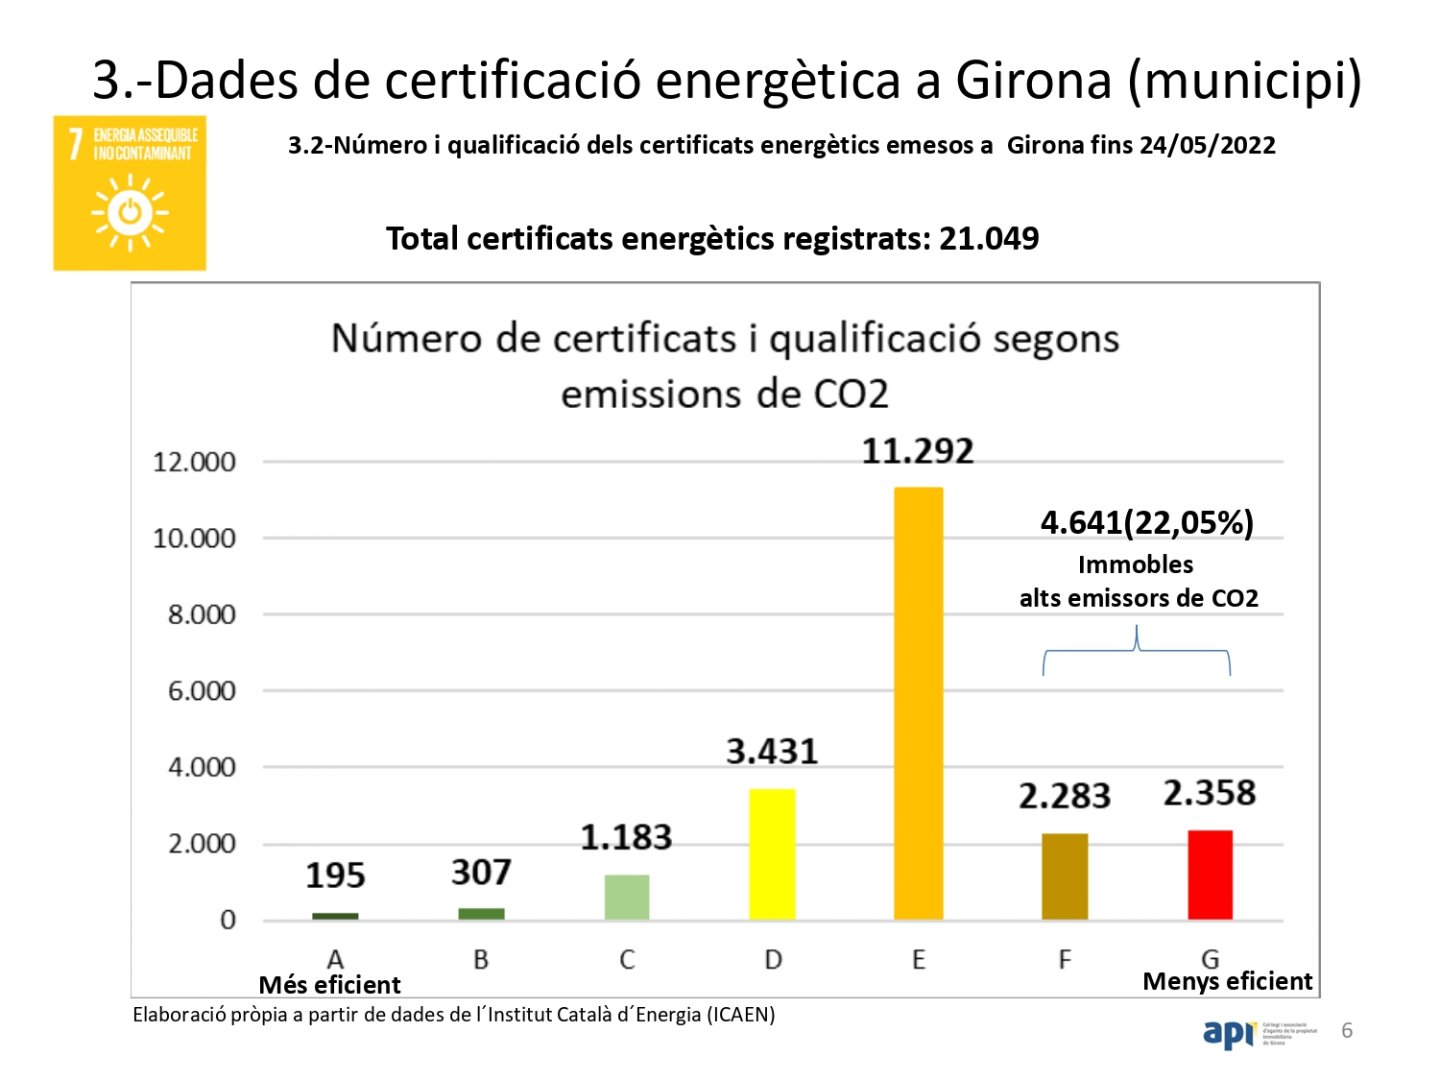 Emisions CO2. Dades a Girona fins 24/5/2022